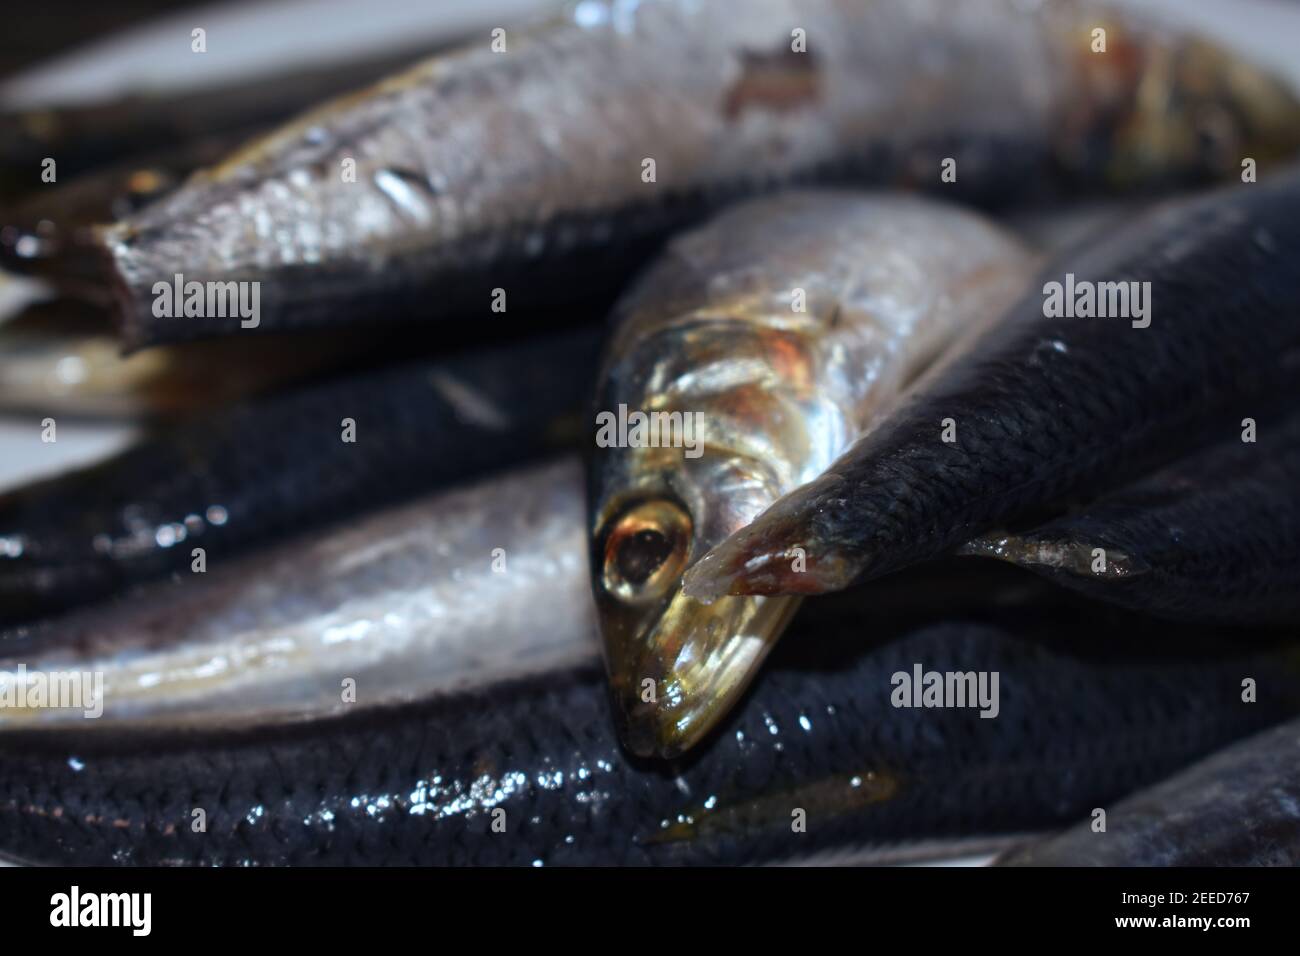 cleaned sardines or Sardina Pilchardus piled up on a plate. A dish common in India and European countries. Stock Photo